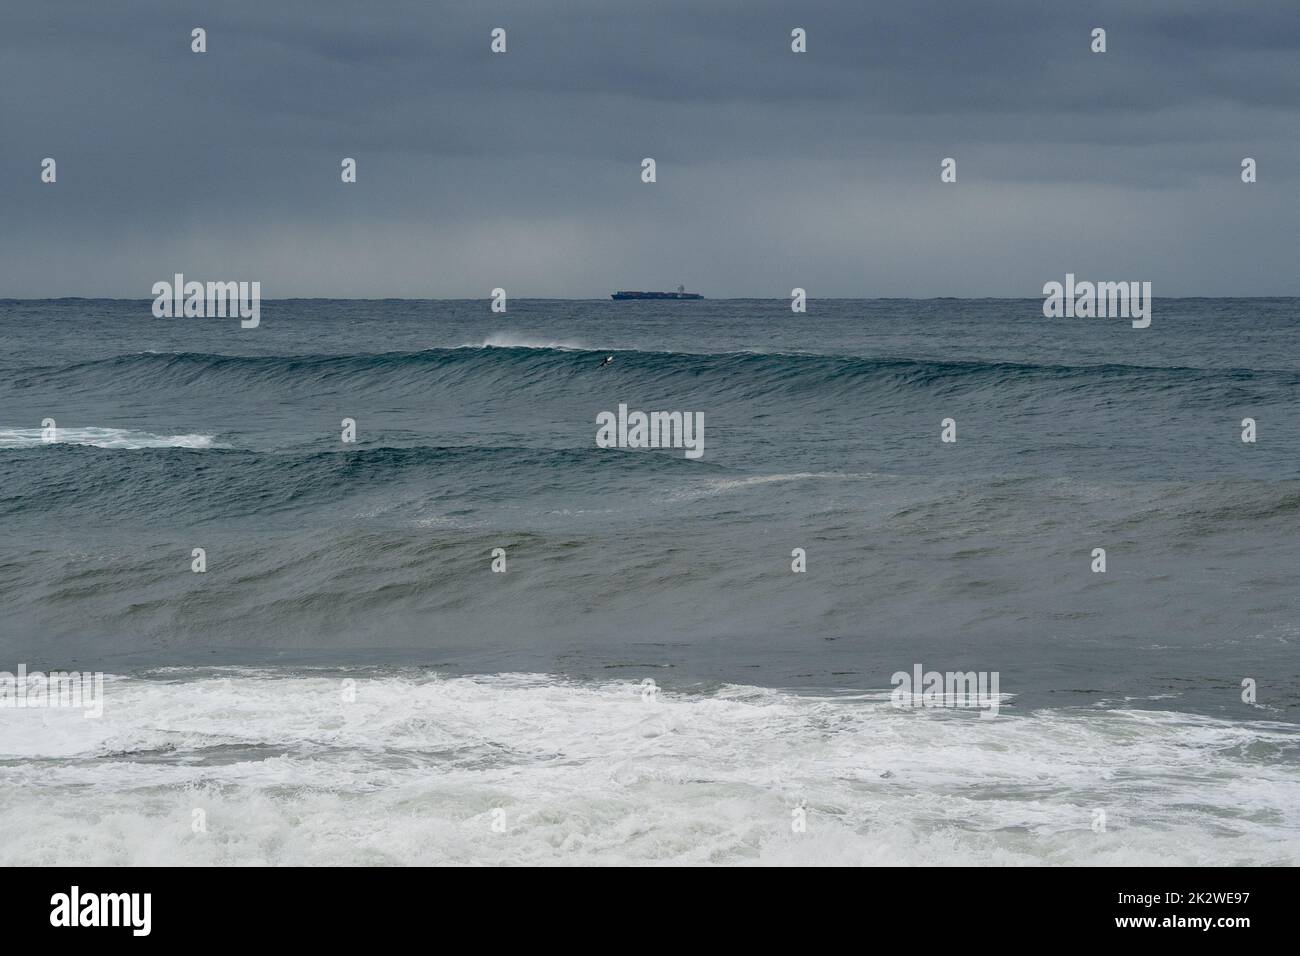 A scenic shot of a surfer catching a large wave at South Maroubra, Australia Stock Photo